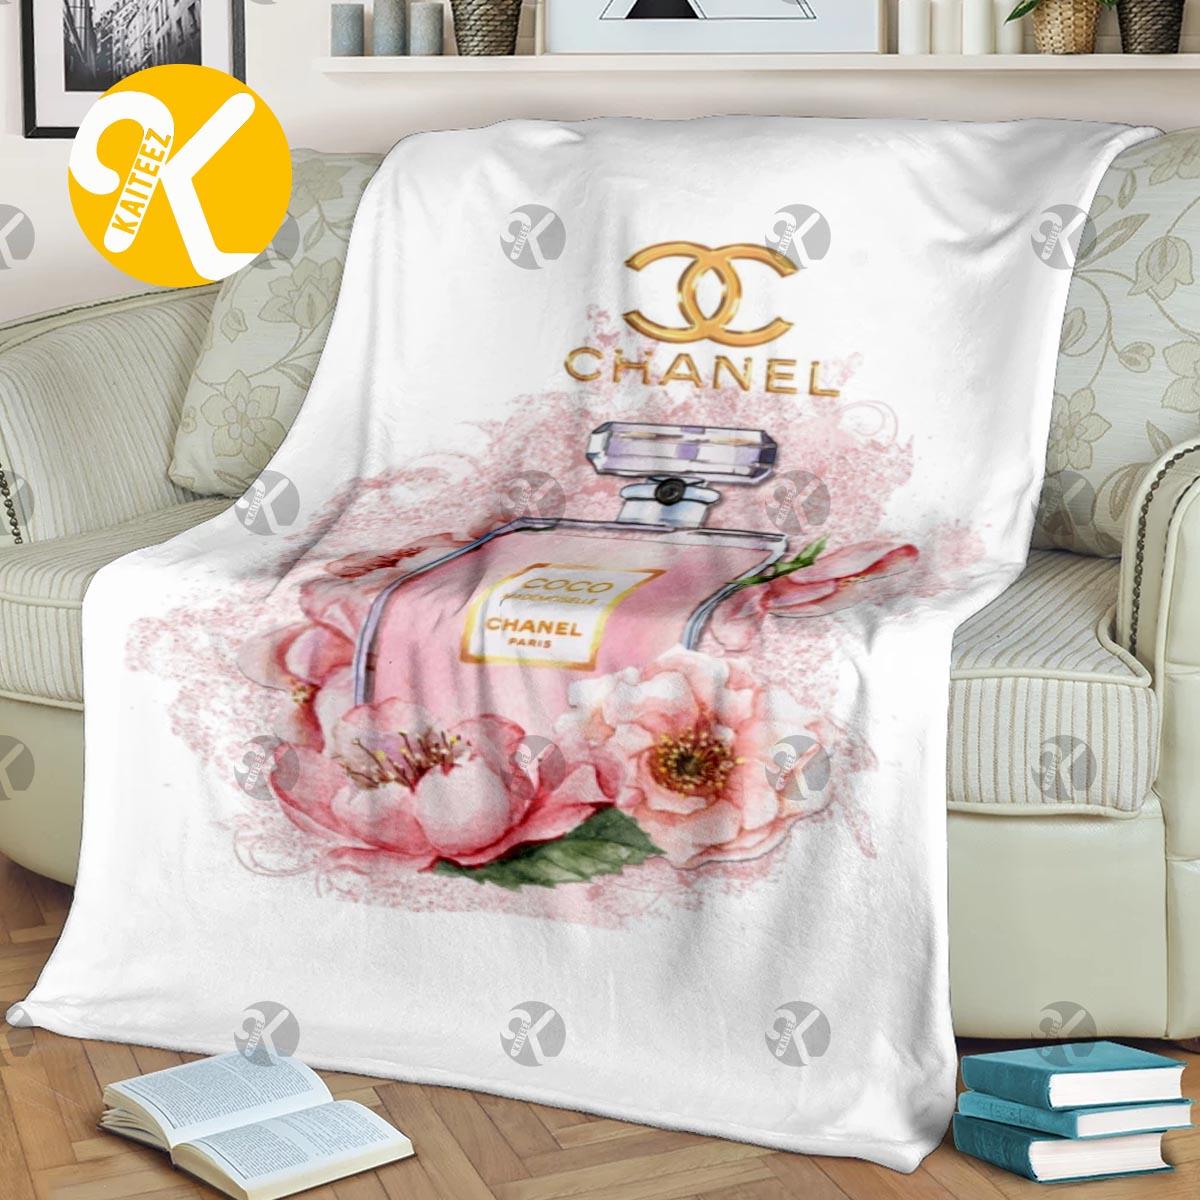 Buy CHANEL Chanel camellia logo here mark bath towel beach towel large size towel  towel blanket cotton 100% pink white white from Japan - Buy authentic Plus  exclusive items from Japan